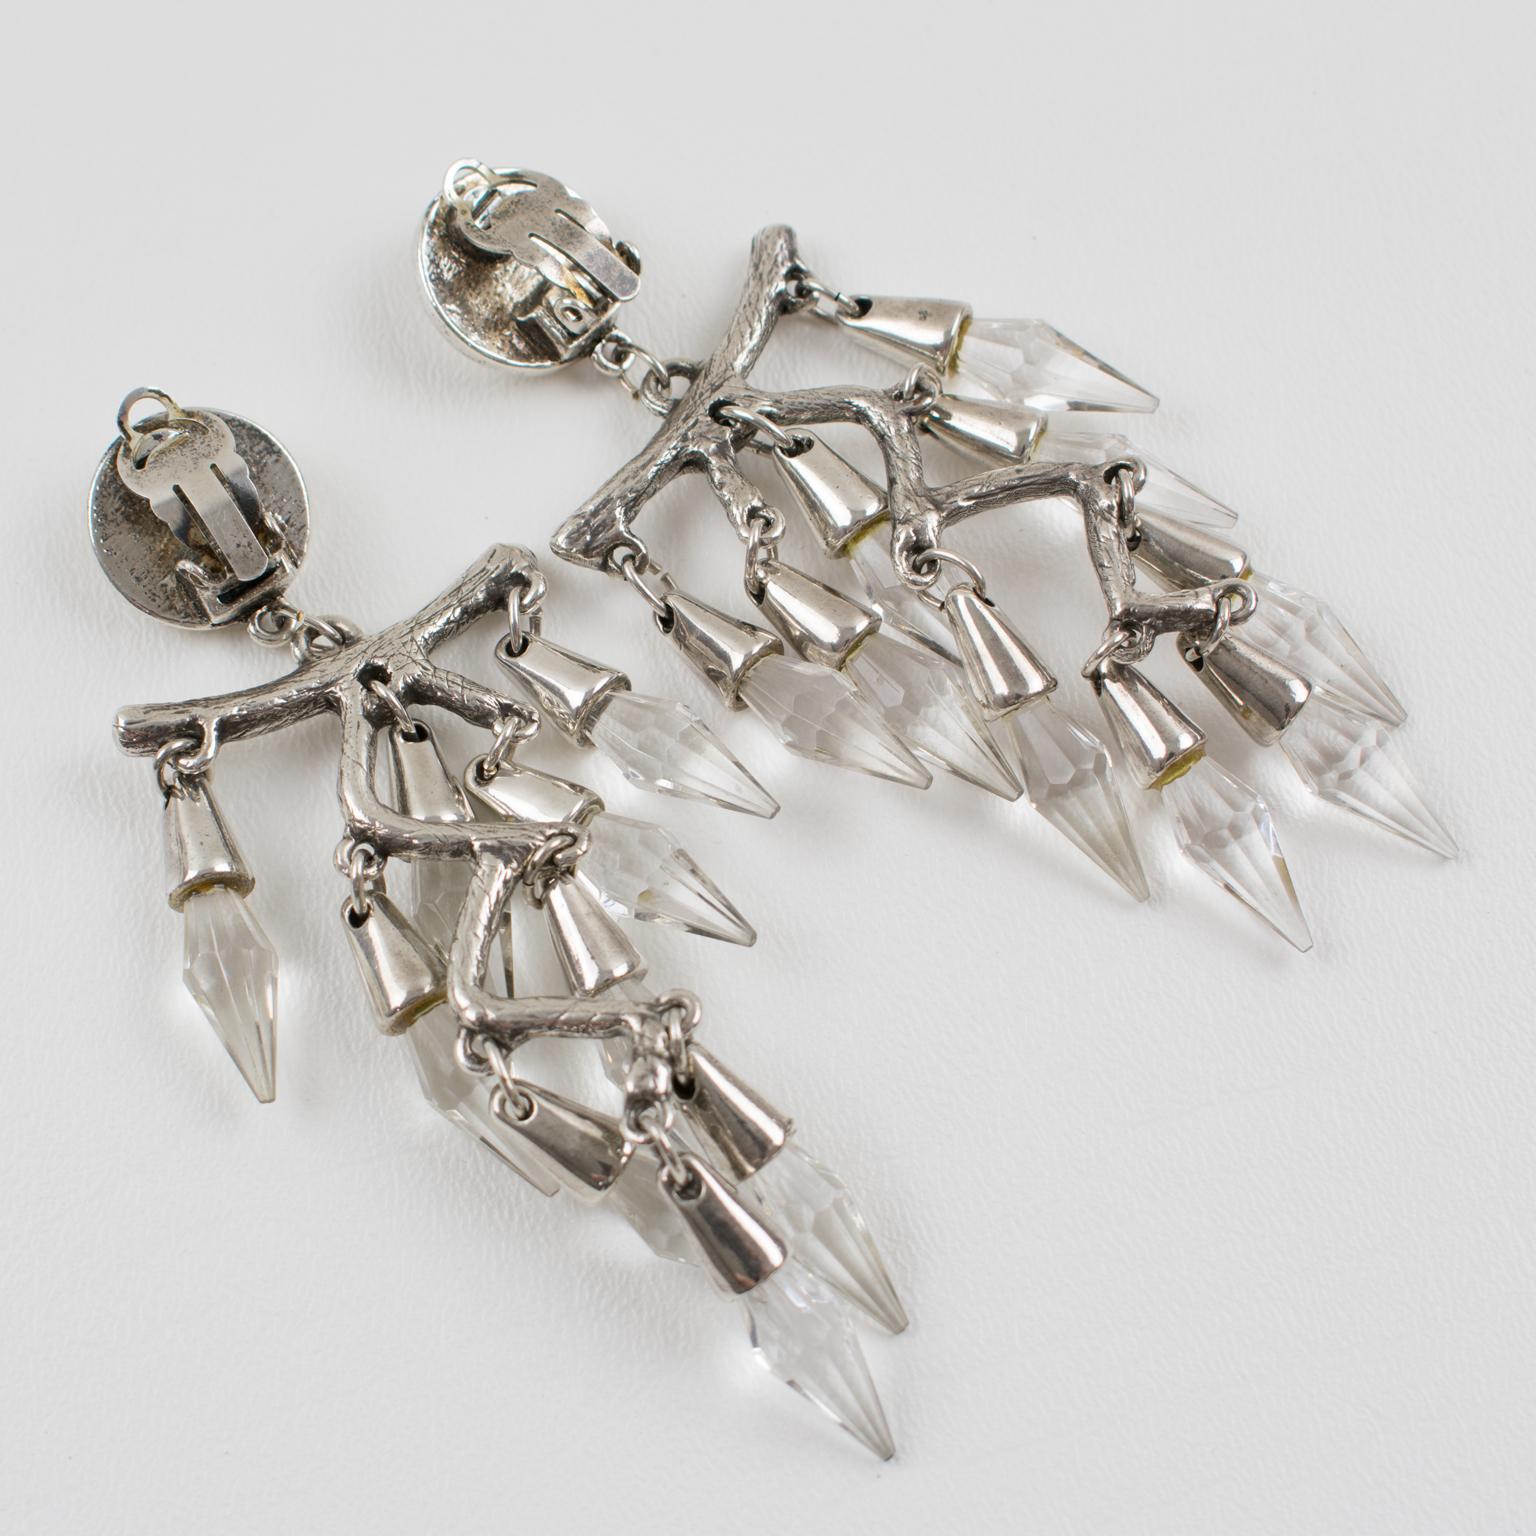 Massive Chandelier Silver Plate Clip Earrings with Dangle Crystal Drops In Excellent Condition For Sale In Atlanta, GA